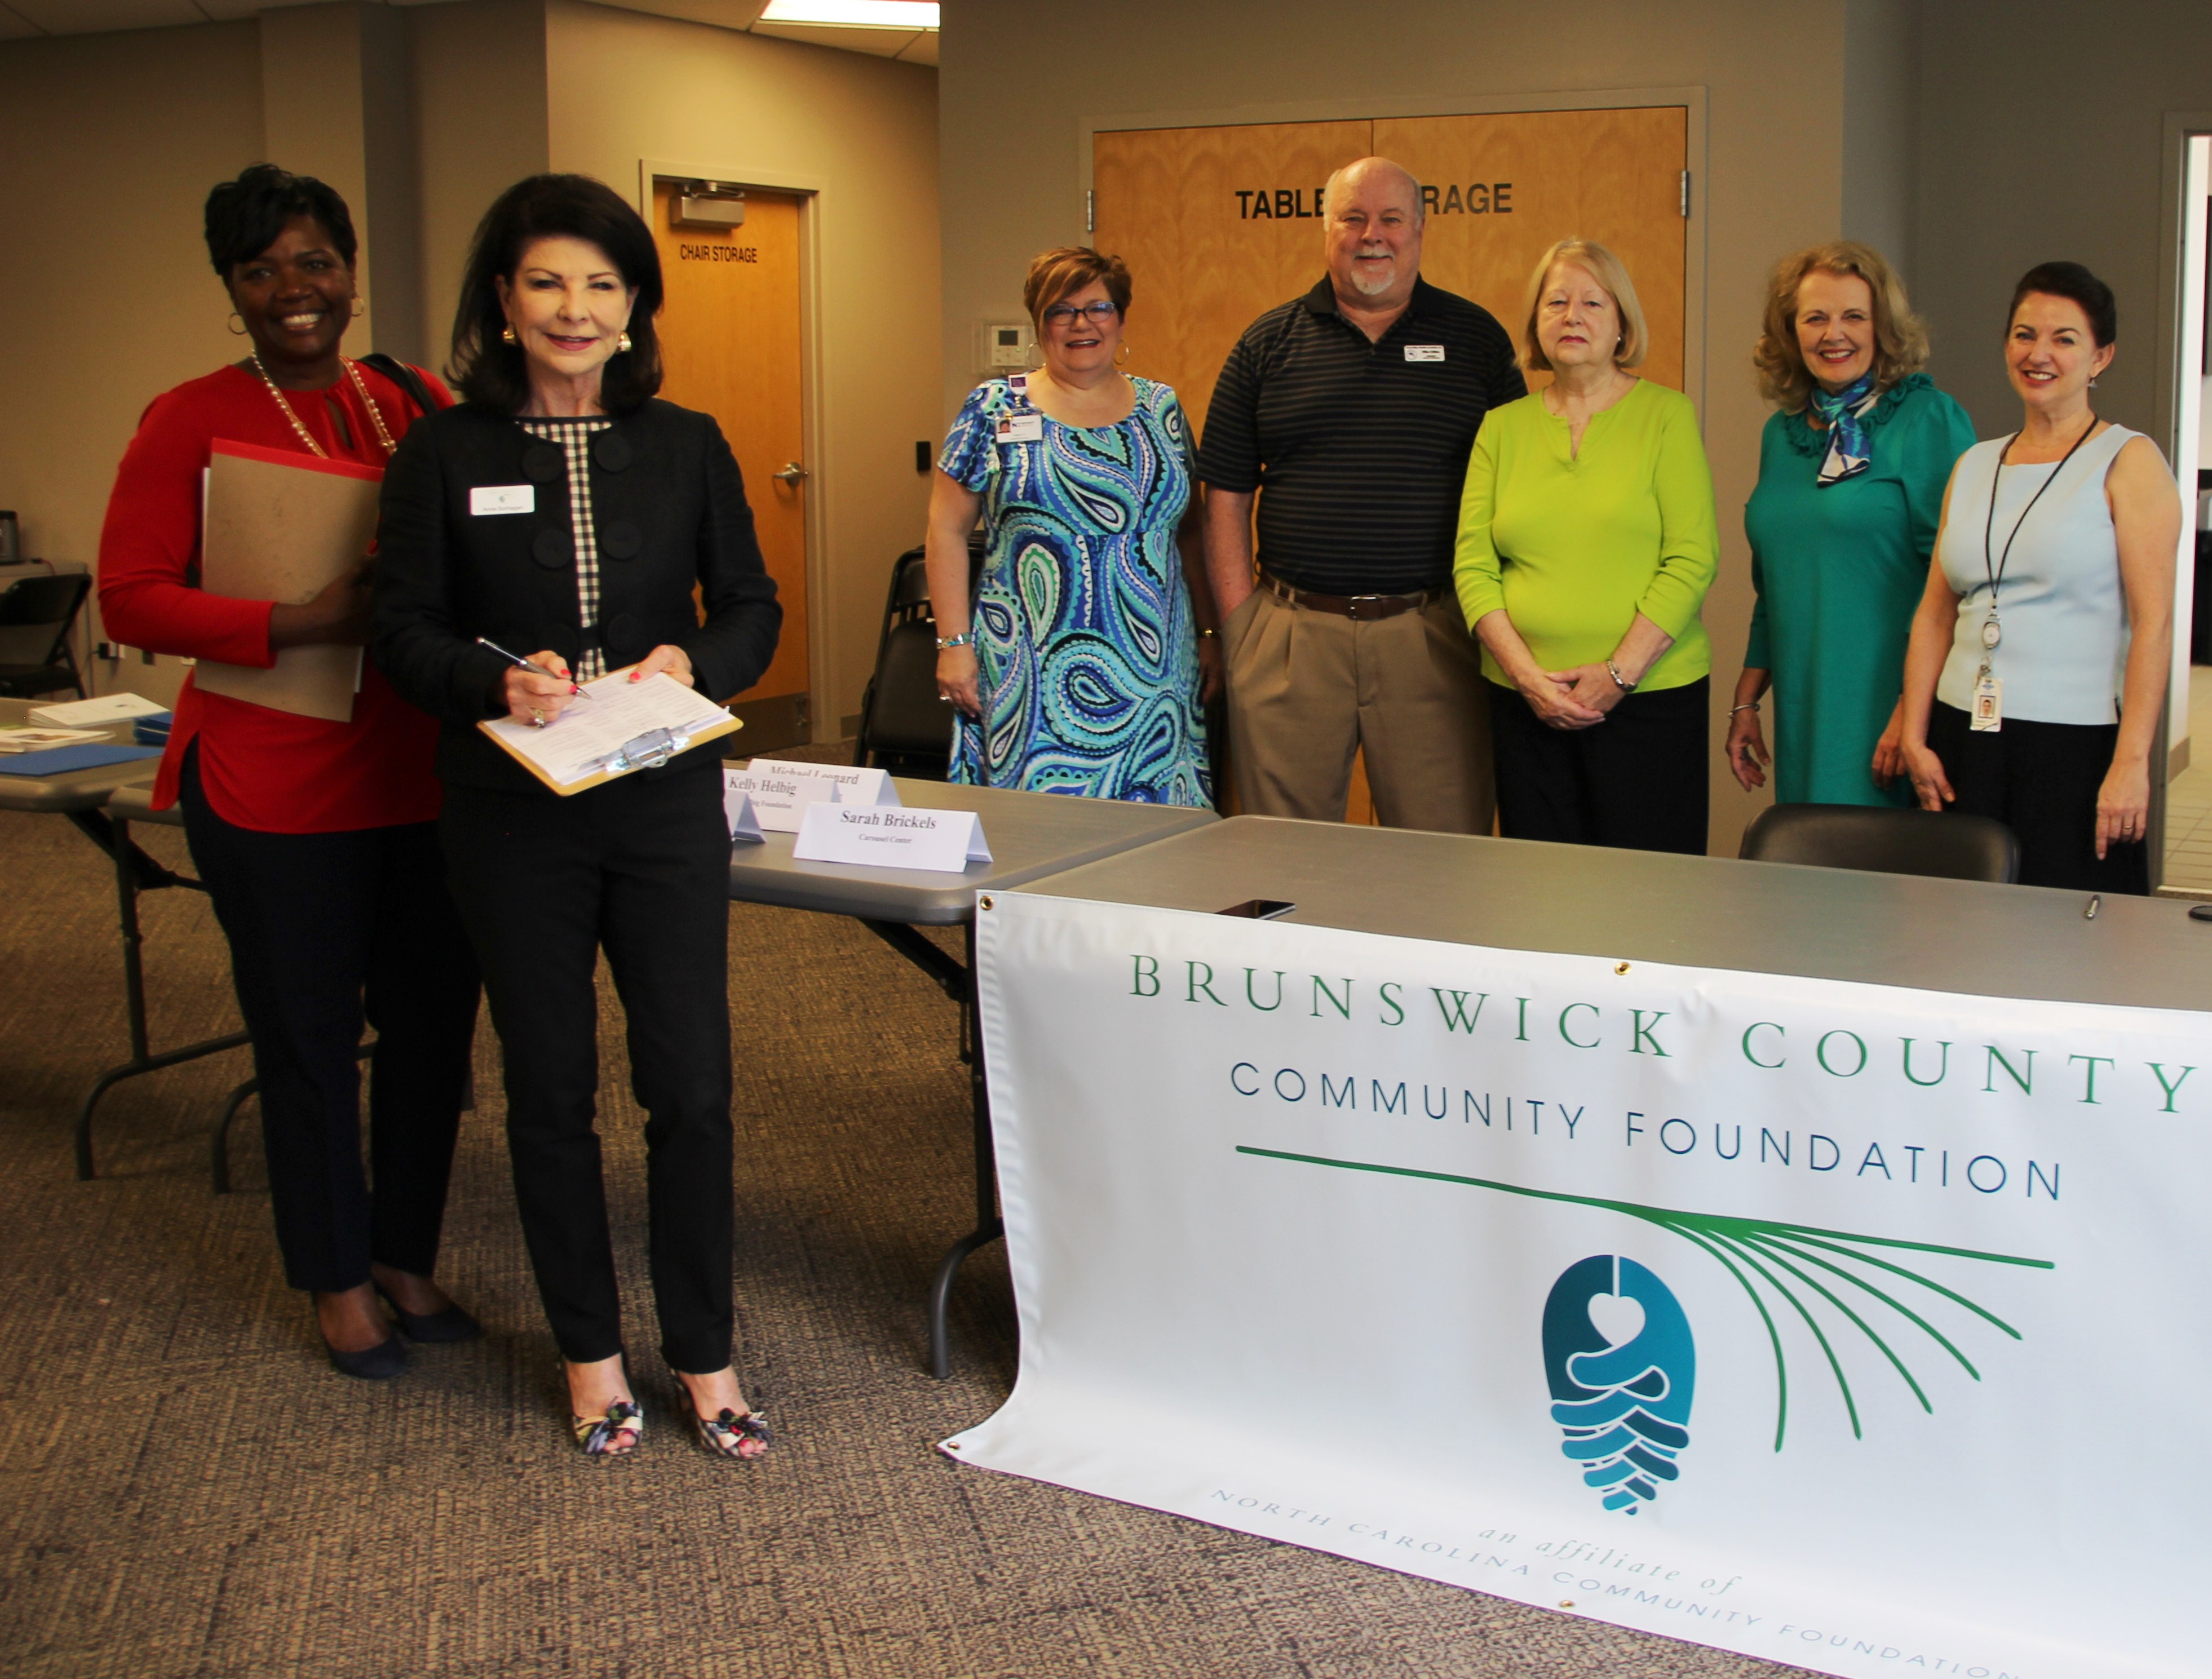 (From left to right) Linda Stanley (Novant Health Foundation), Anne Sorhagen (NCCF Regional Director), Cindy Cheatham, Mike Gildea, Jayne Matthews, Rosie Allen Ryan and Heather Holbrook (all Brunswick County Community Foundation board members) greet participants at corporate matching gifts seminar. 